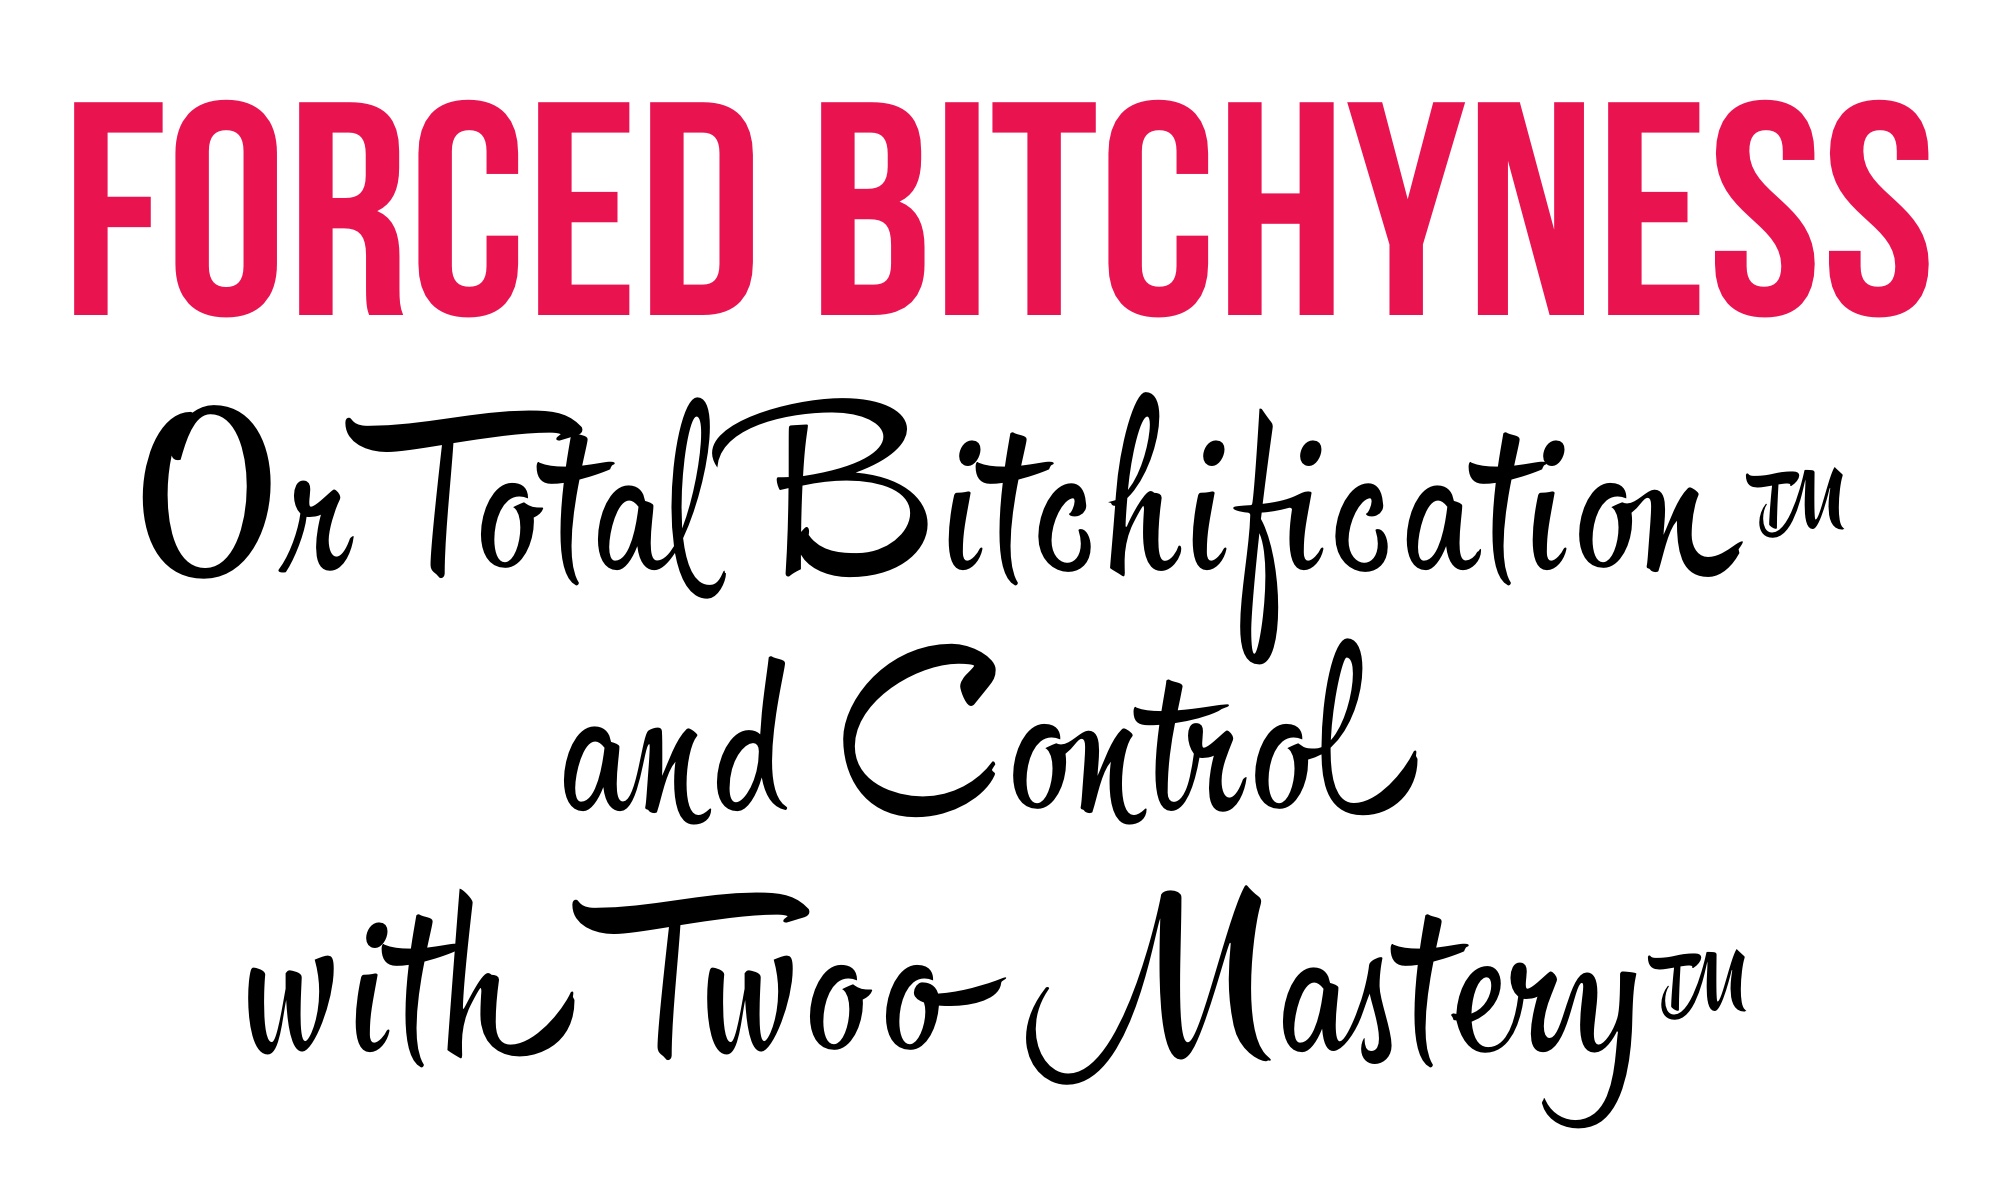 The words: Forced Bitchyness - Or Total Bitchification™ and Control with TwooMastery™